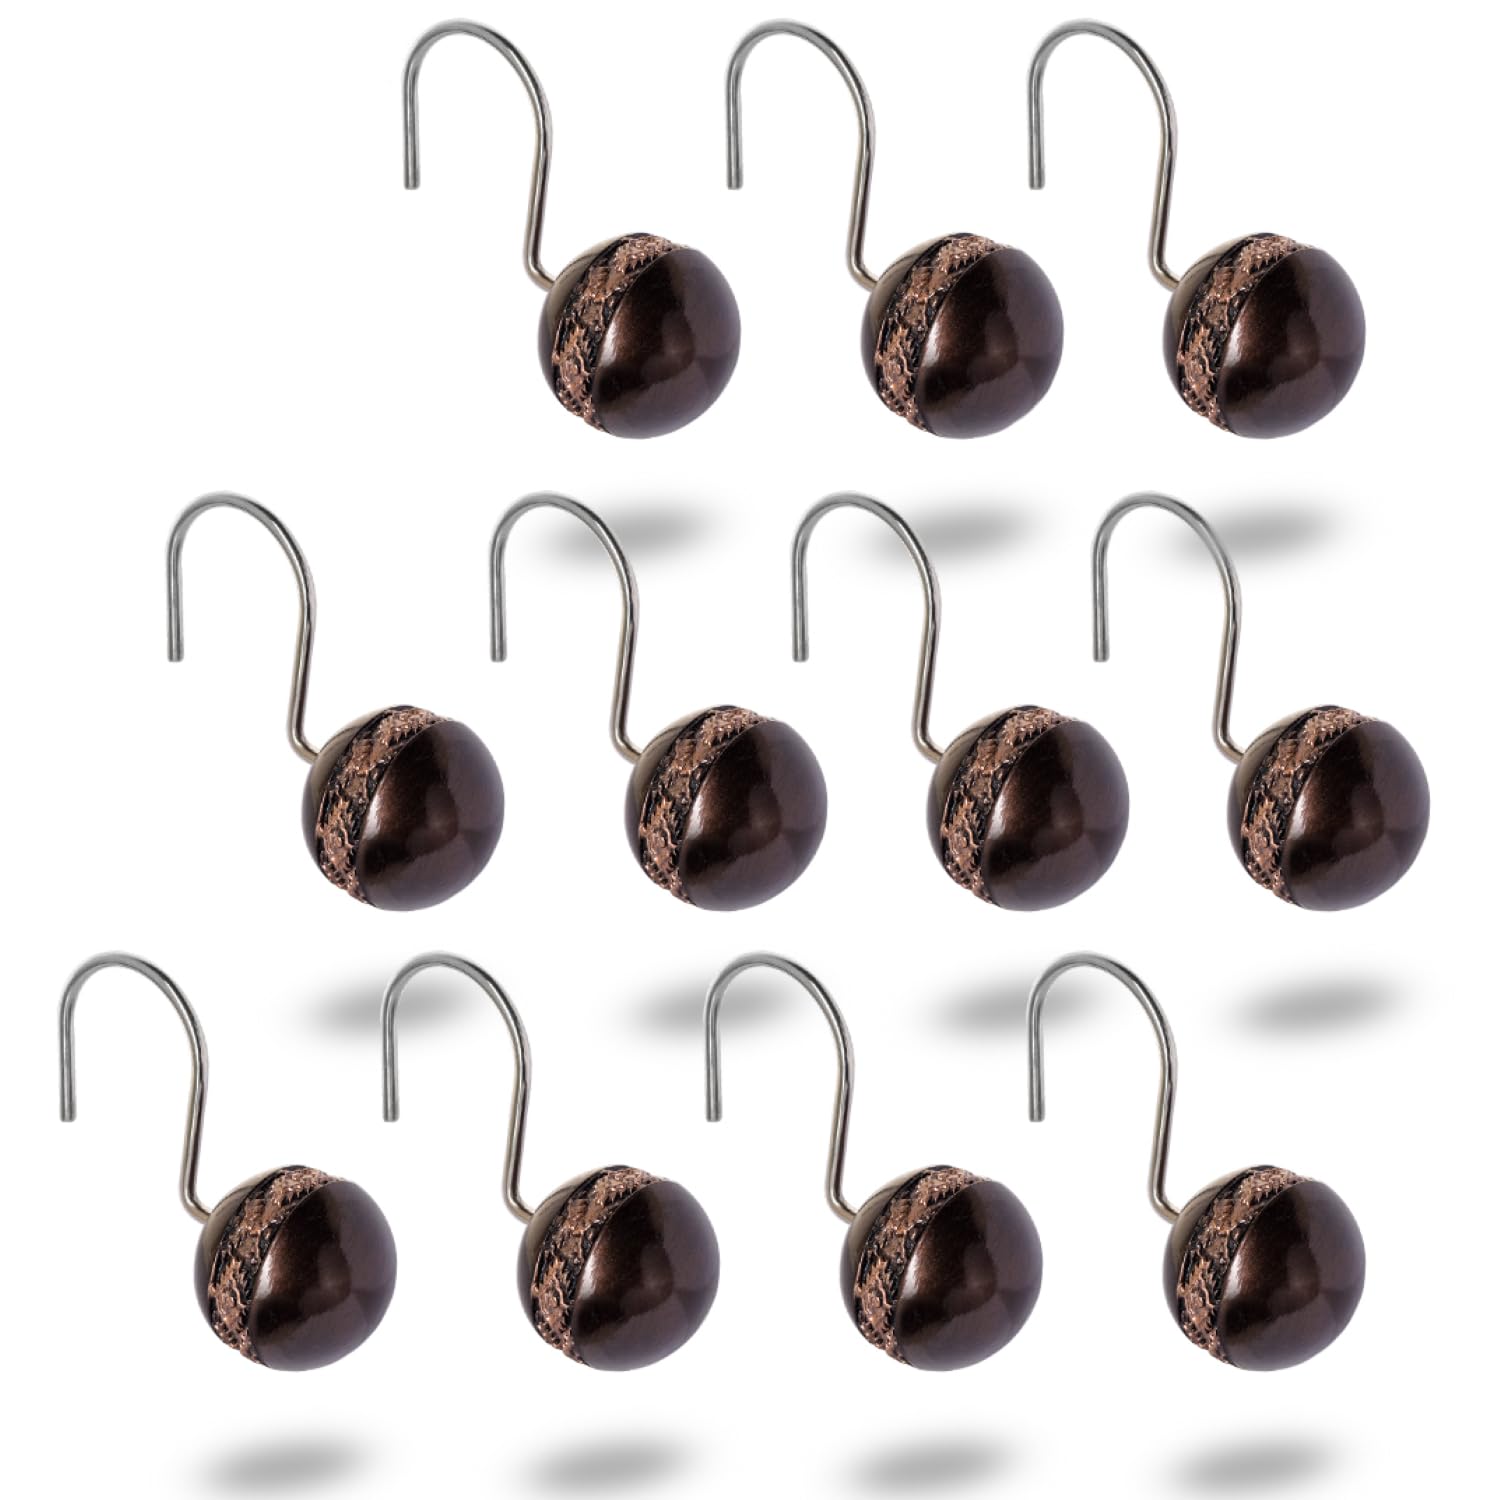 Creative Scents Brown Shower Curtain Hooks Decorative - Set of 12 Shower Hooks for Shower Curtain - Durable Shower Rings for Curtain (Dublin Collection)  - Like New